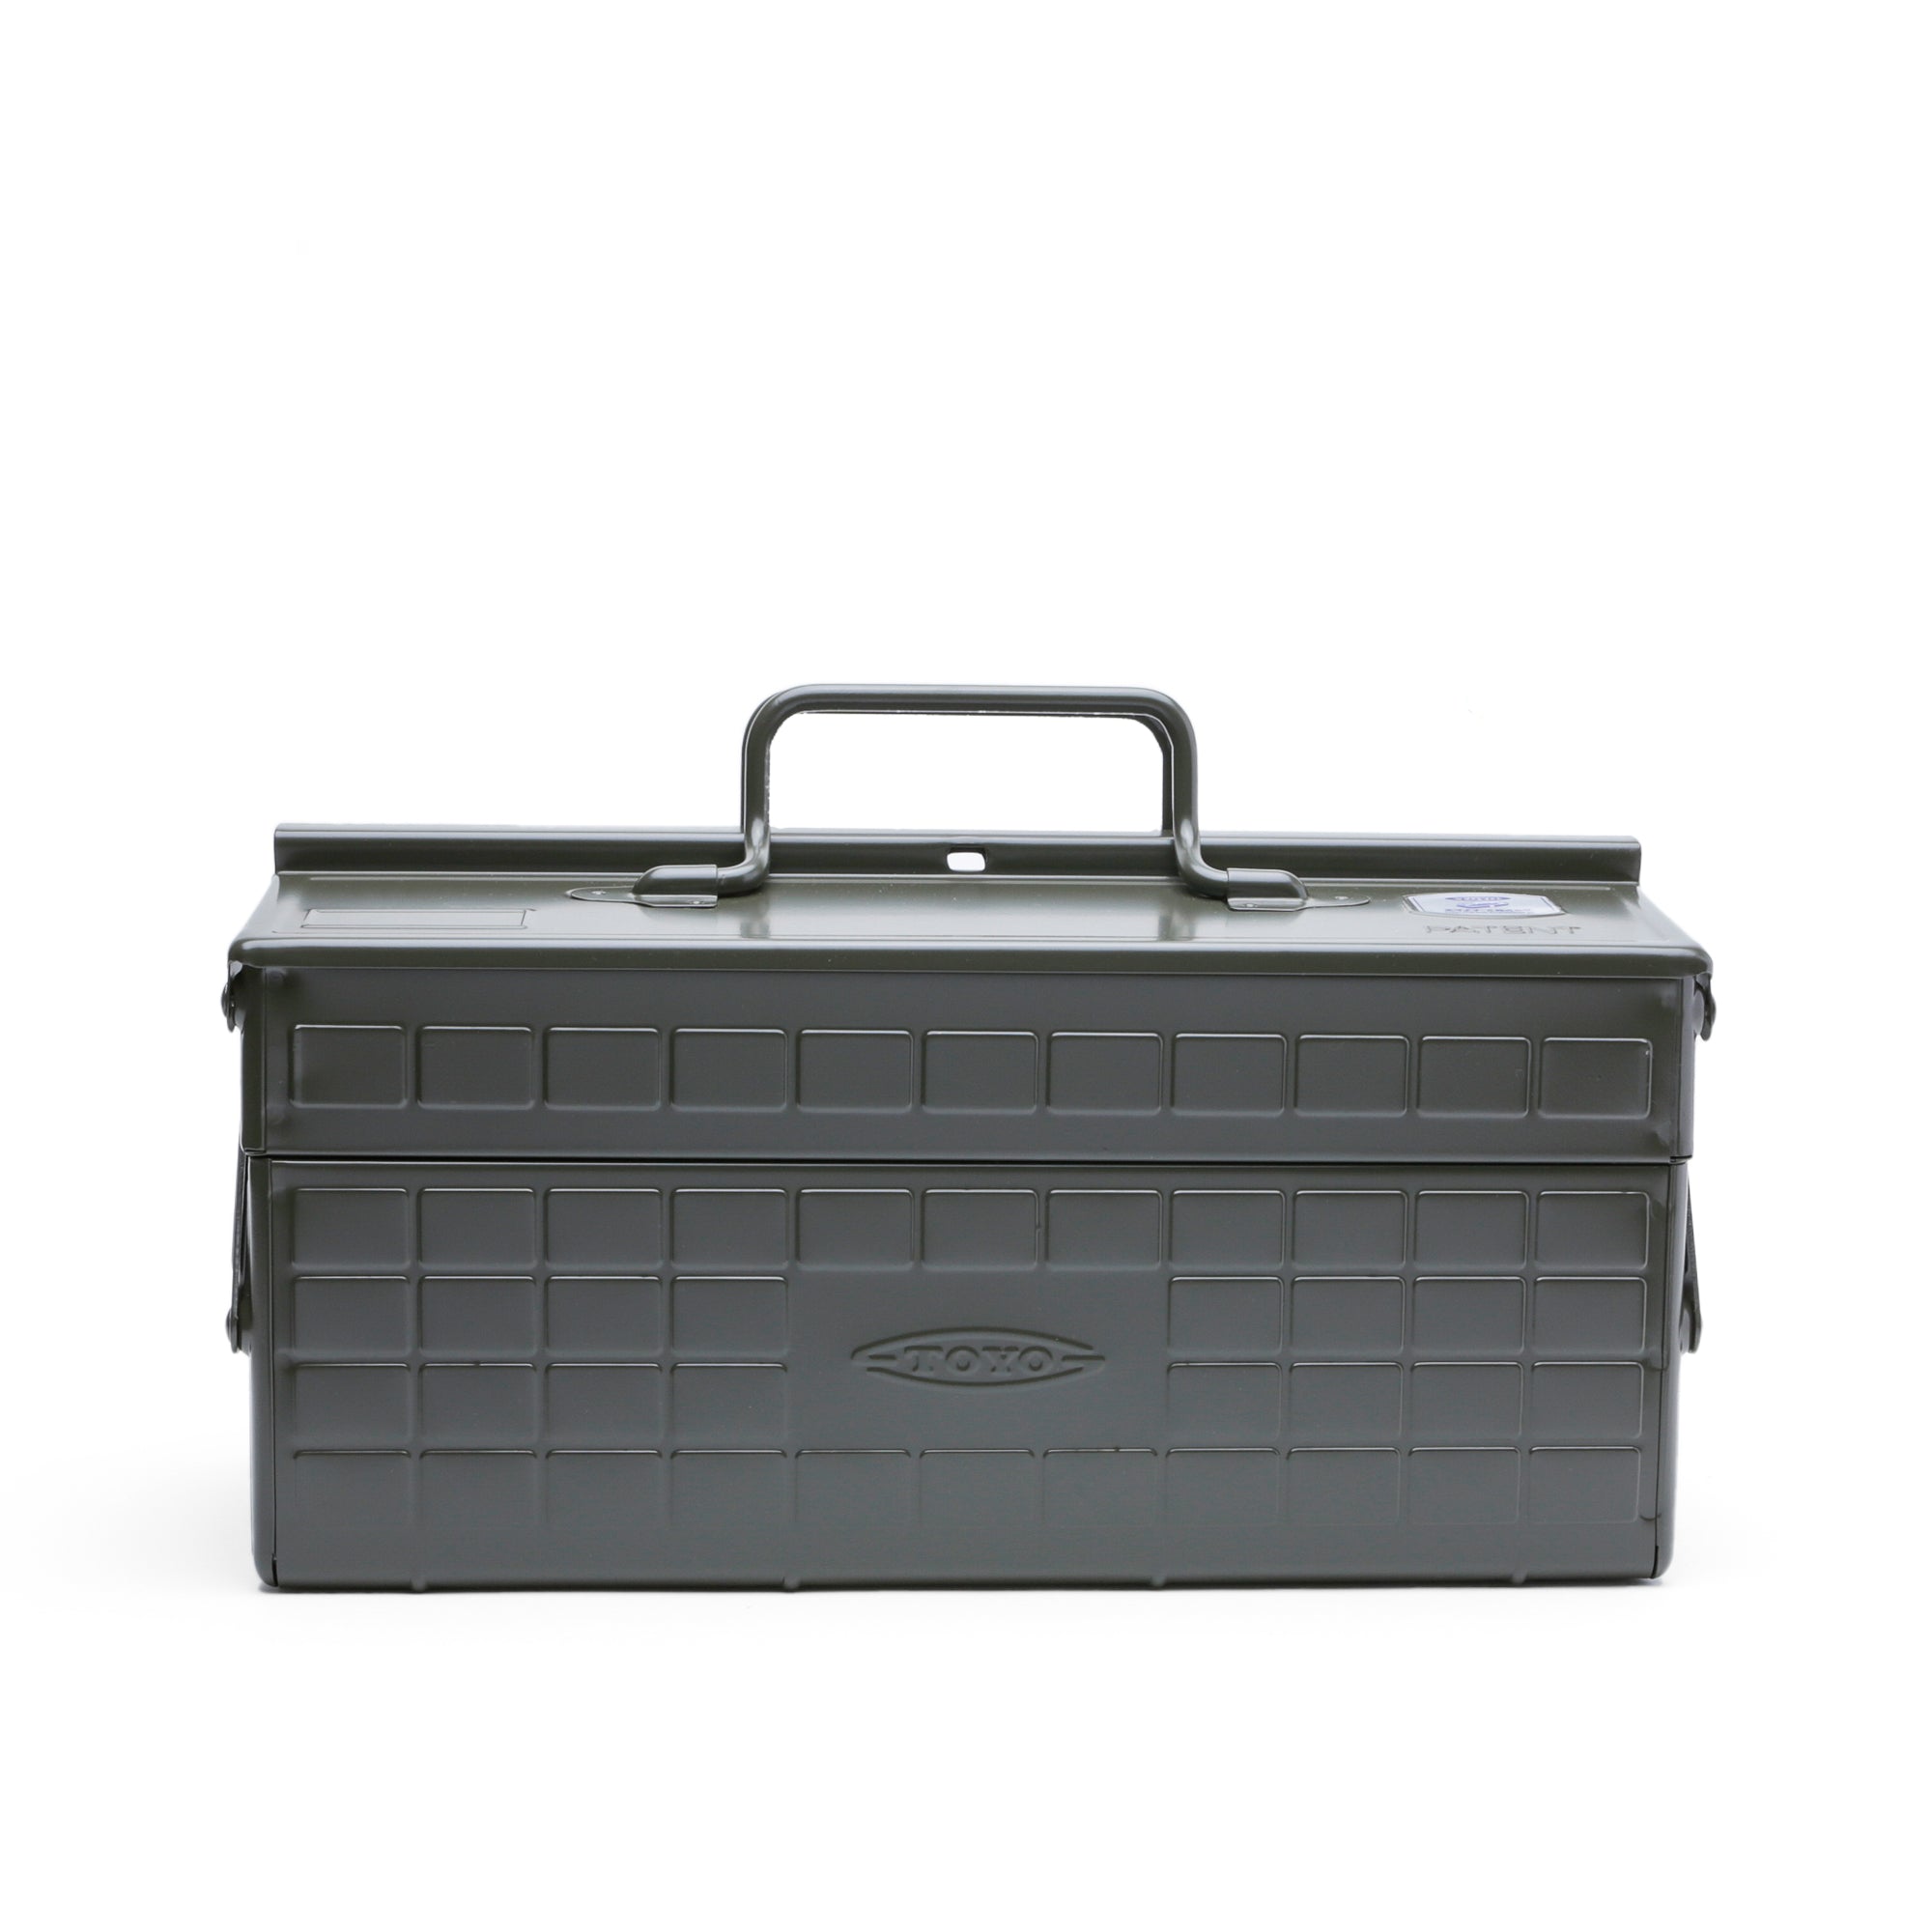 Military Green Toyo Steel Toolbox | Cantilever Lid | Upper Storage Trays, Style ST-350